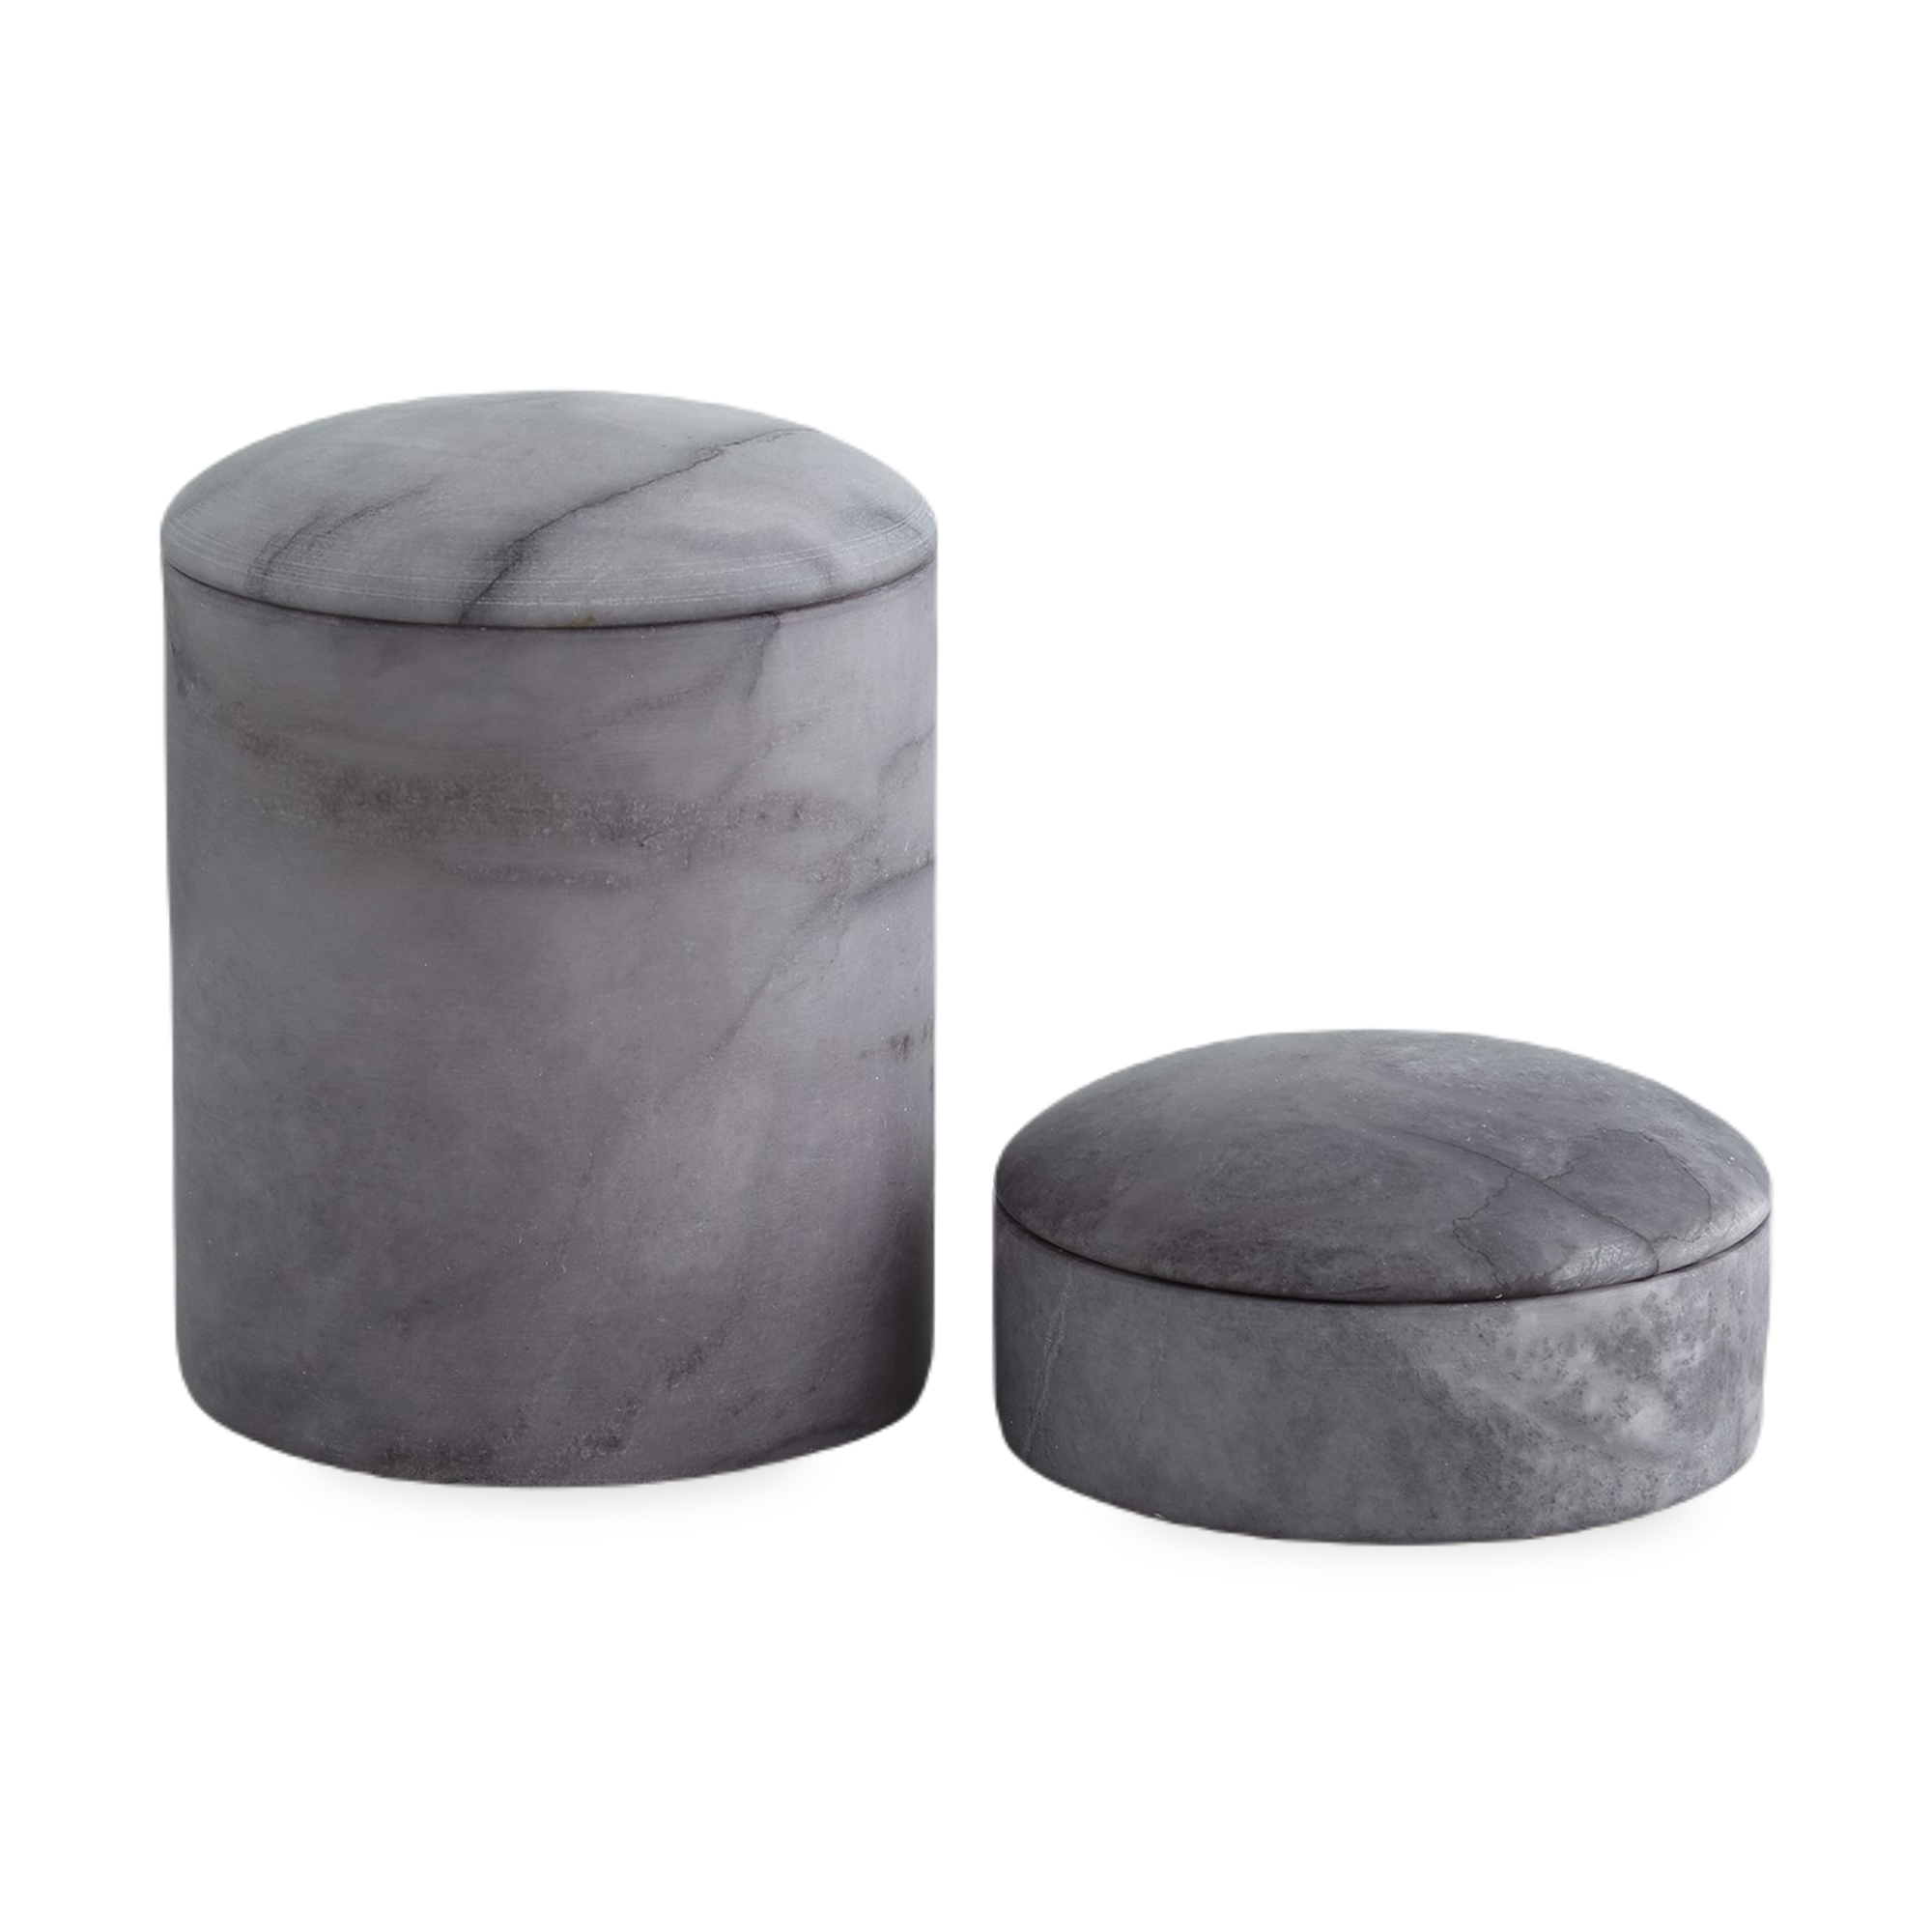 Perfect for a vanity or desk, the Gala Canister is made from natural alabaster with a smooth domed top for a softer statement.